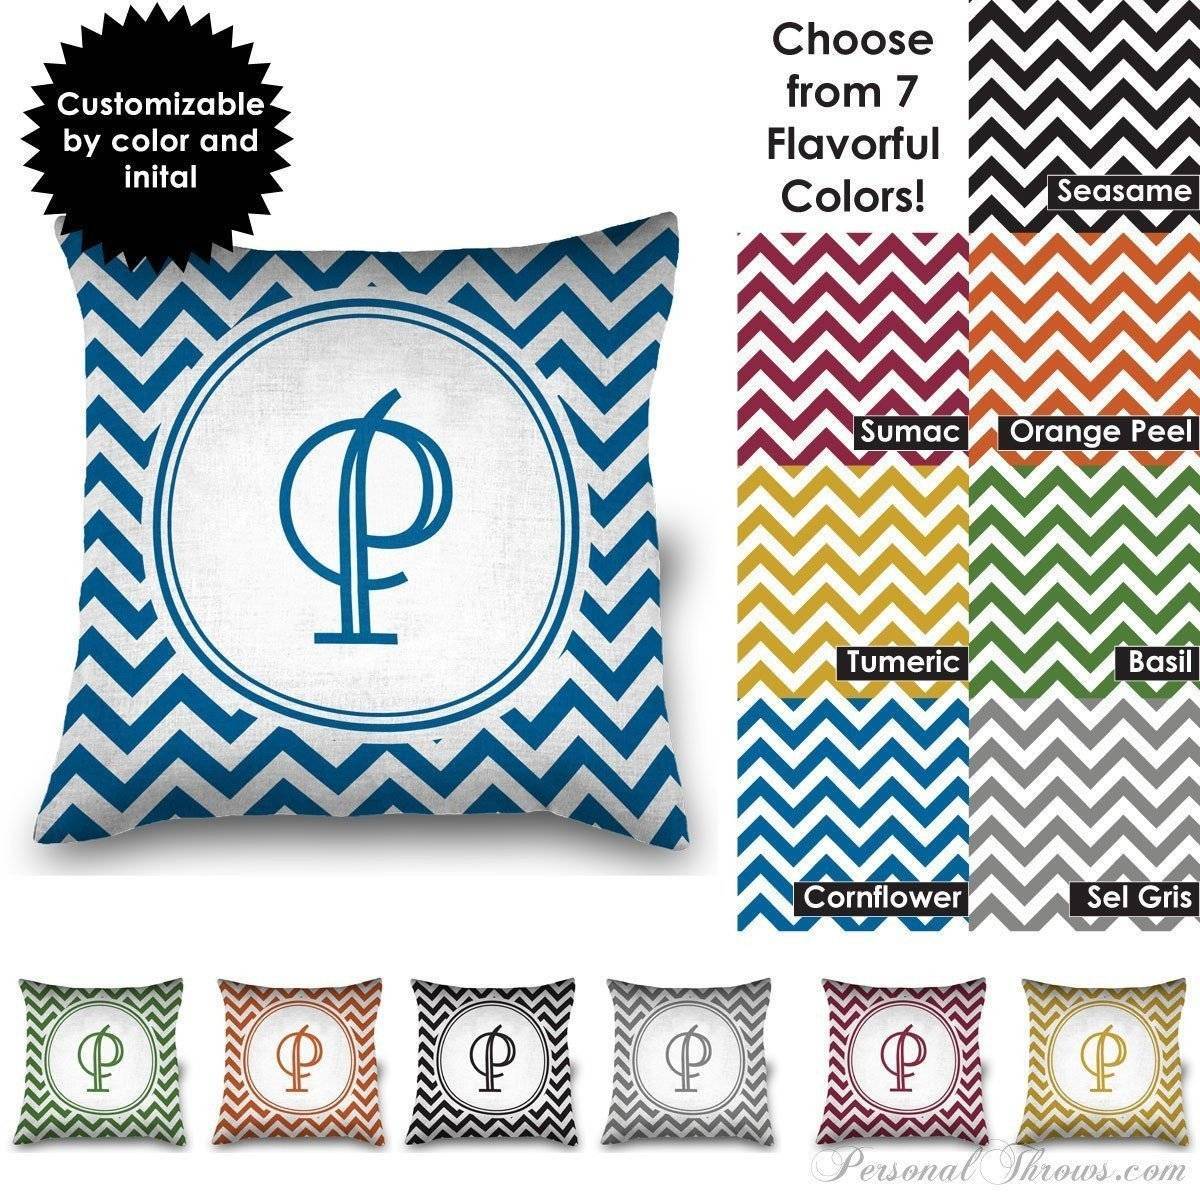 Photo Pillows,Monogrammed Gifts,Other Products,Mother's Day Gifts - 16" Square Chevron Monogrammed MircoFleece Pillow